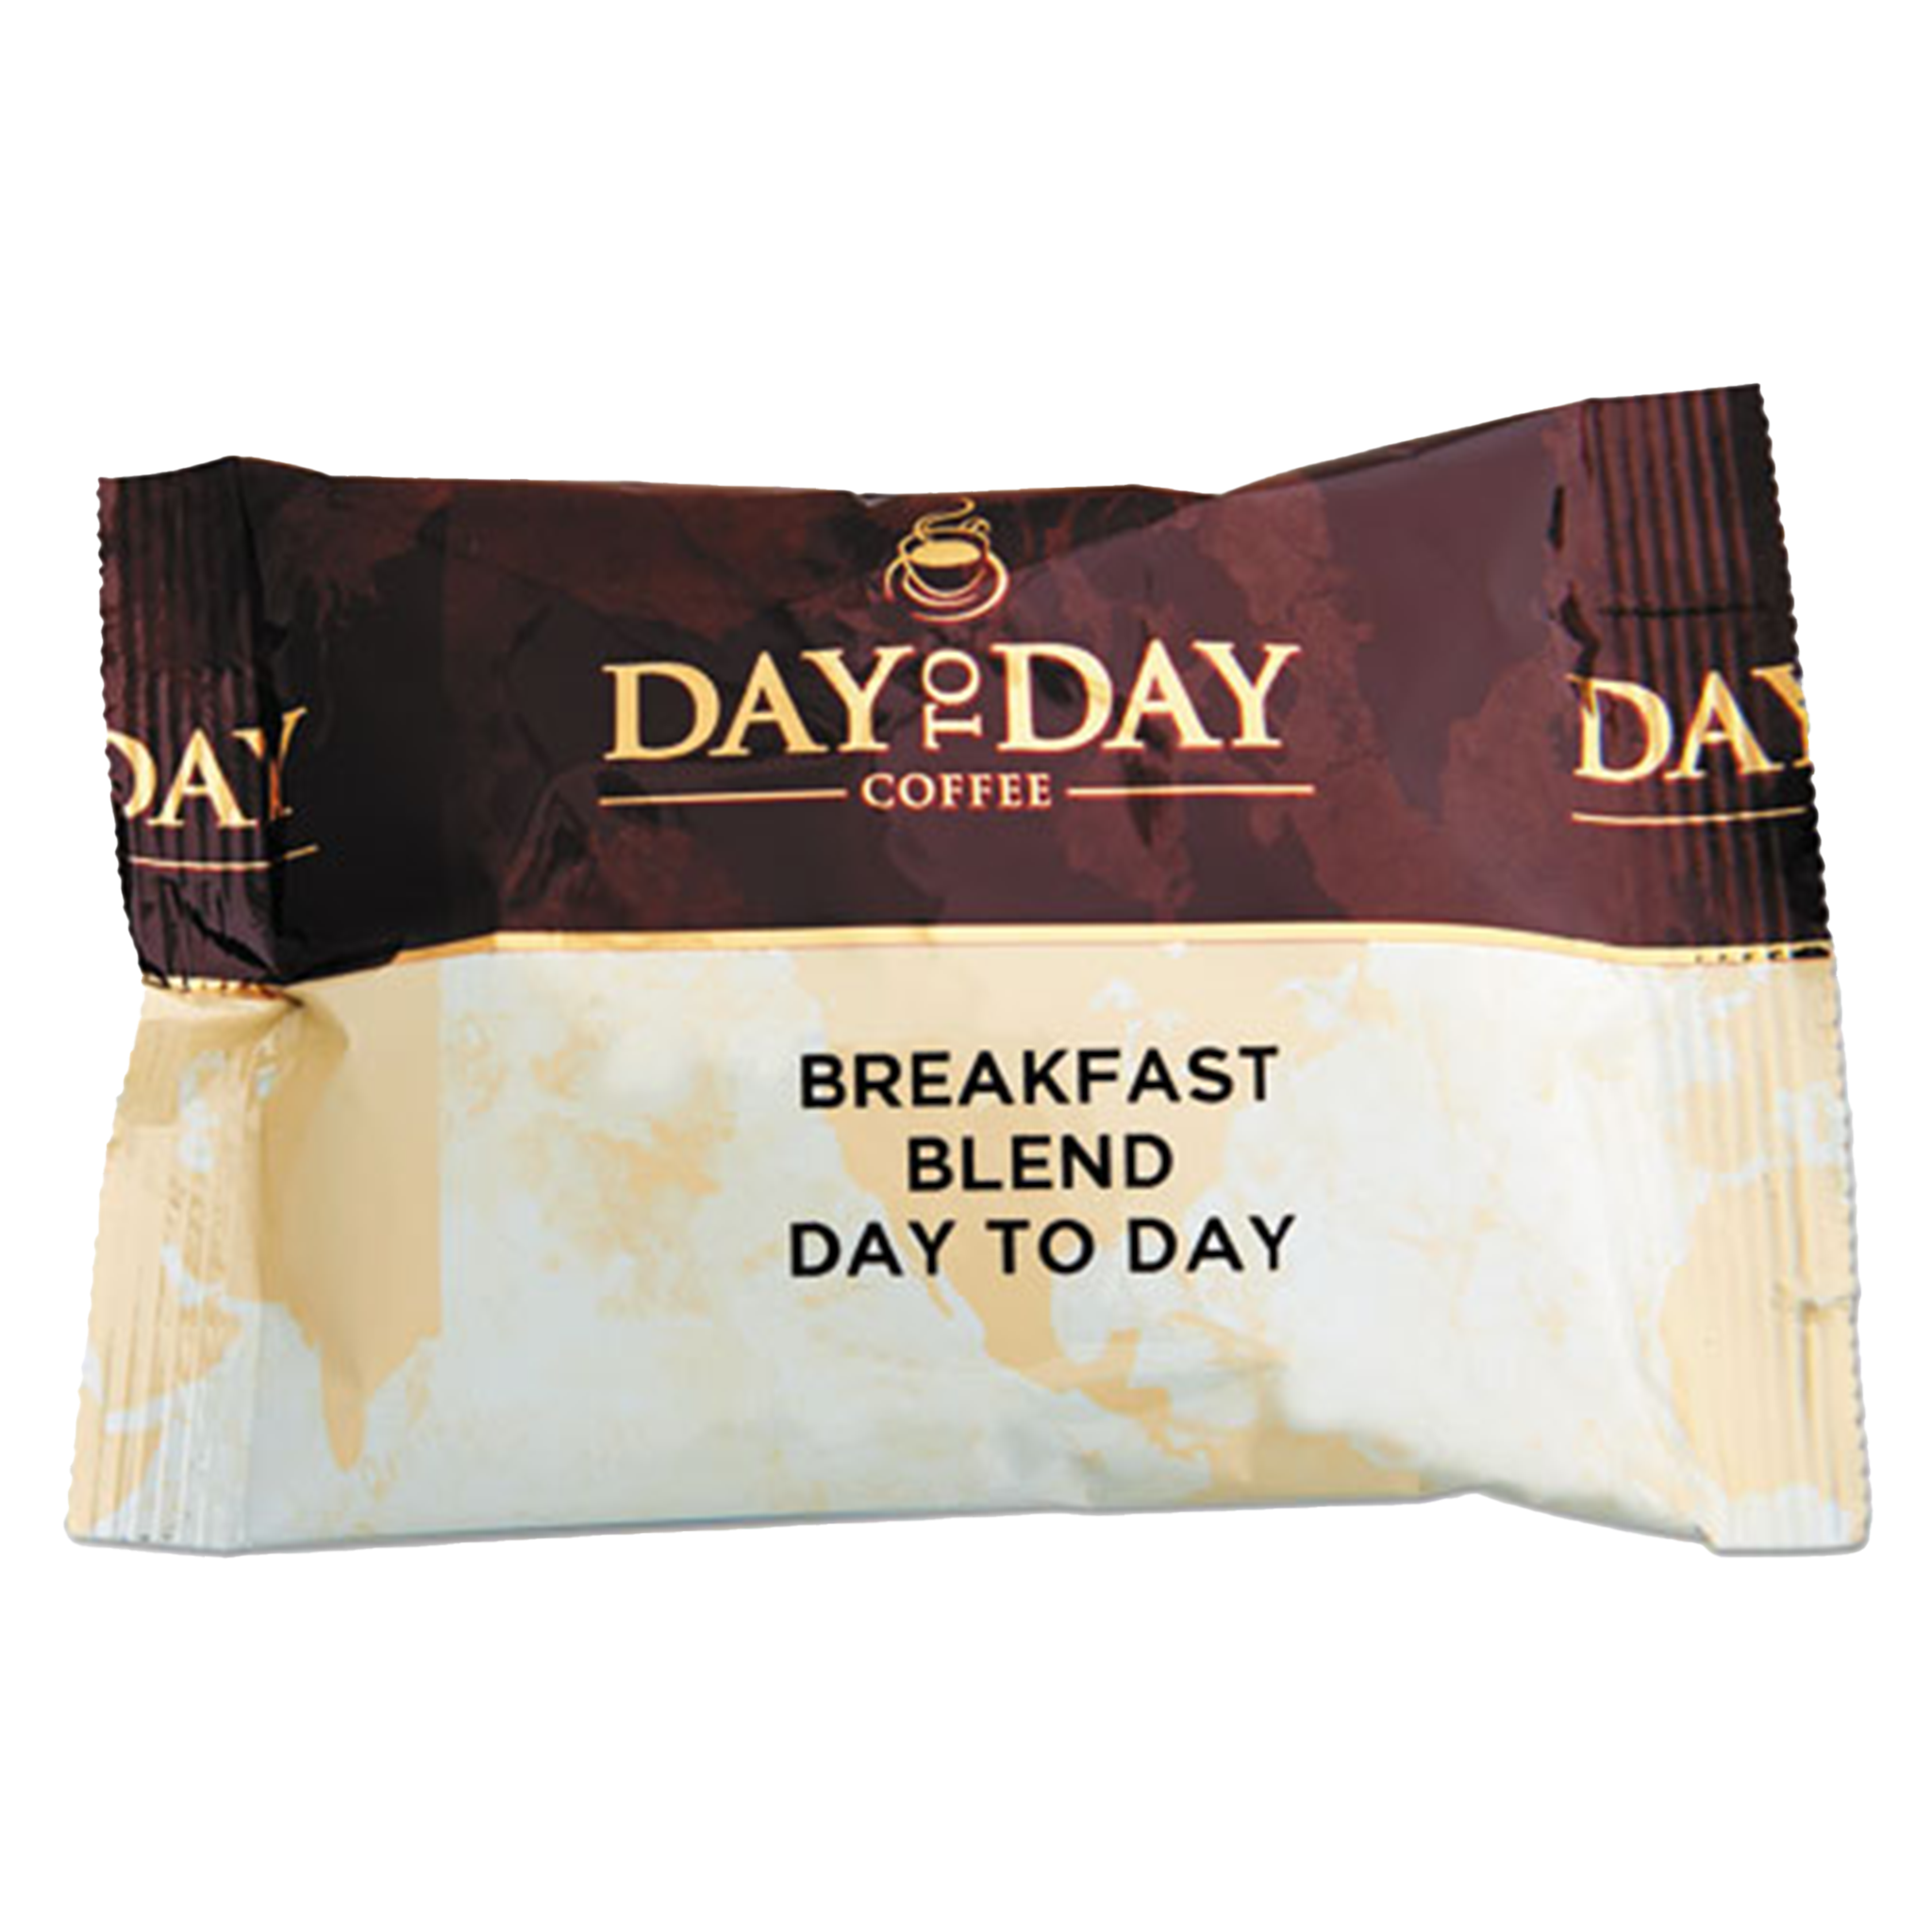 Day To Day Coffee - 1.5oz - 42 Pack